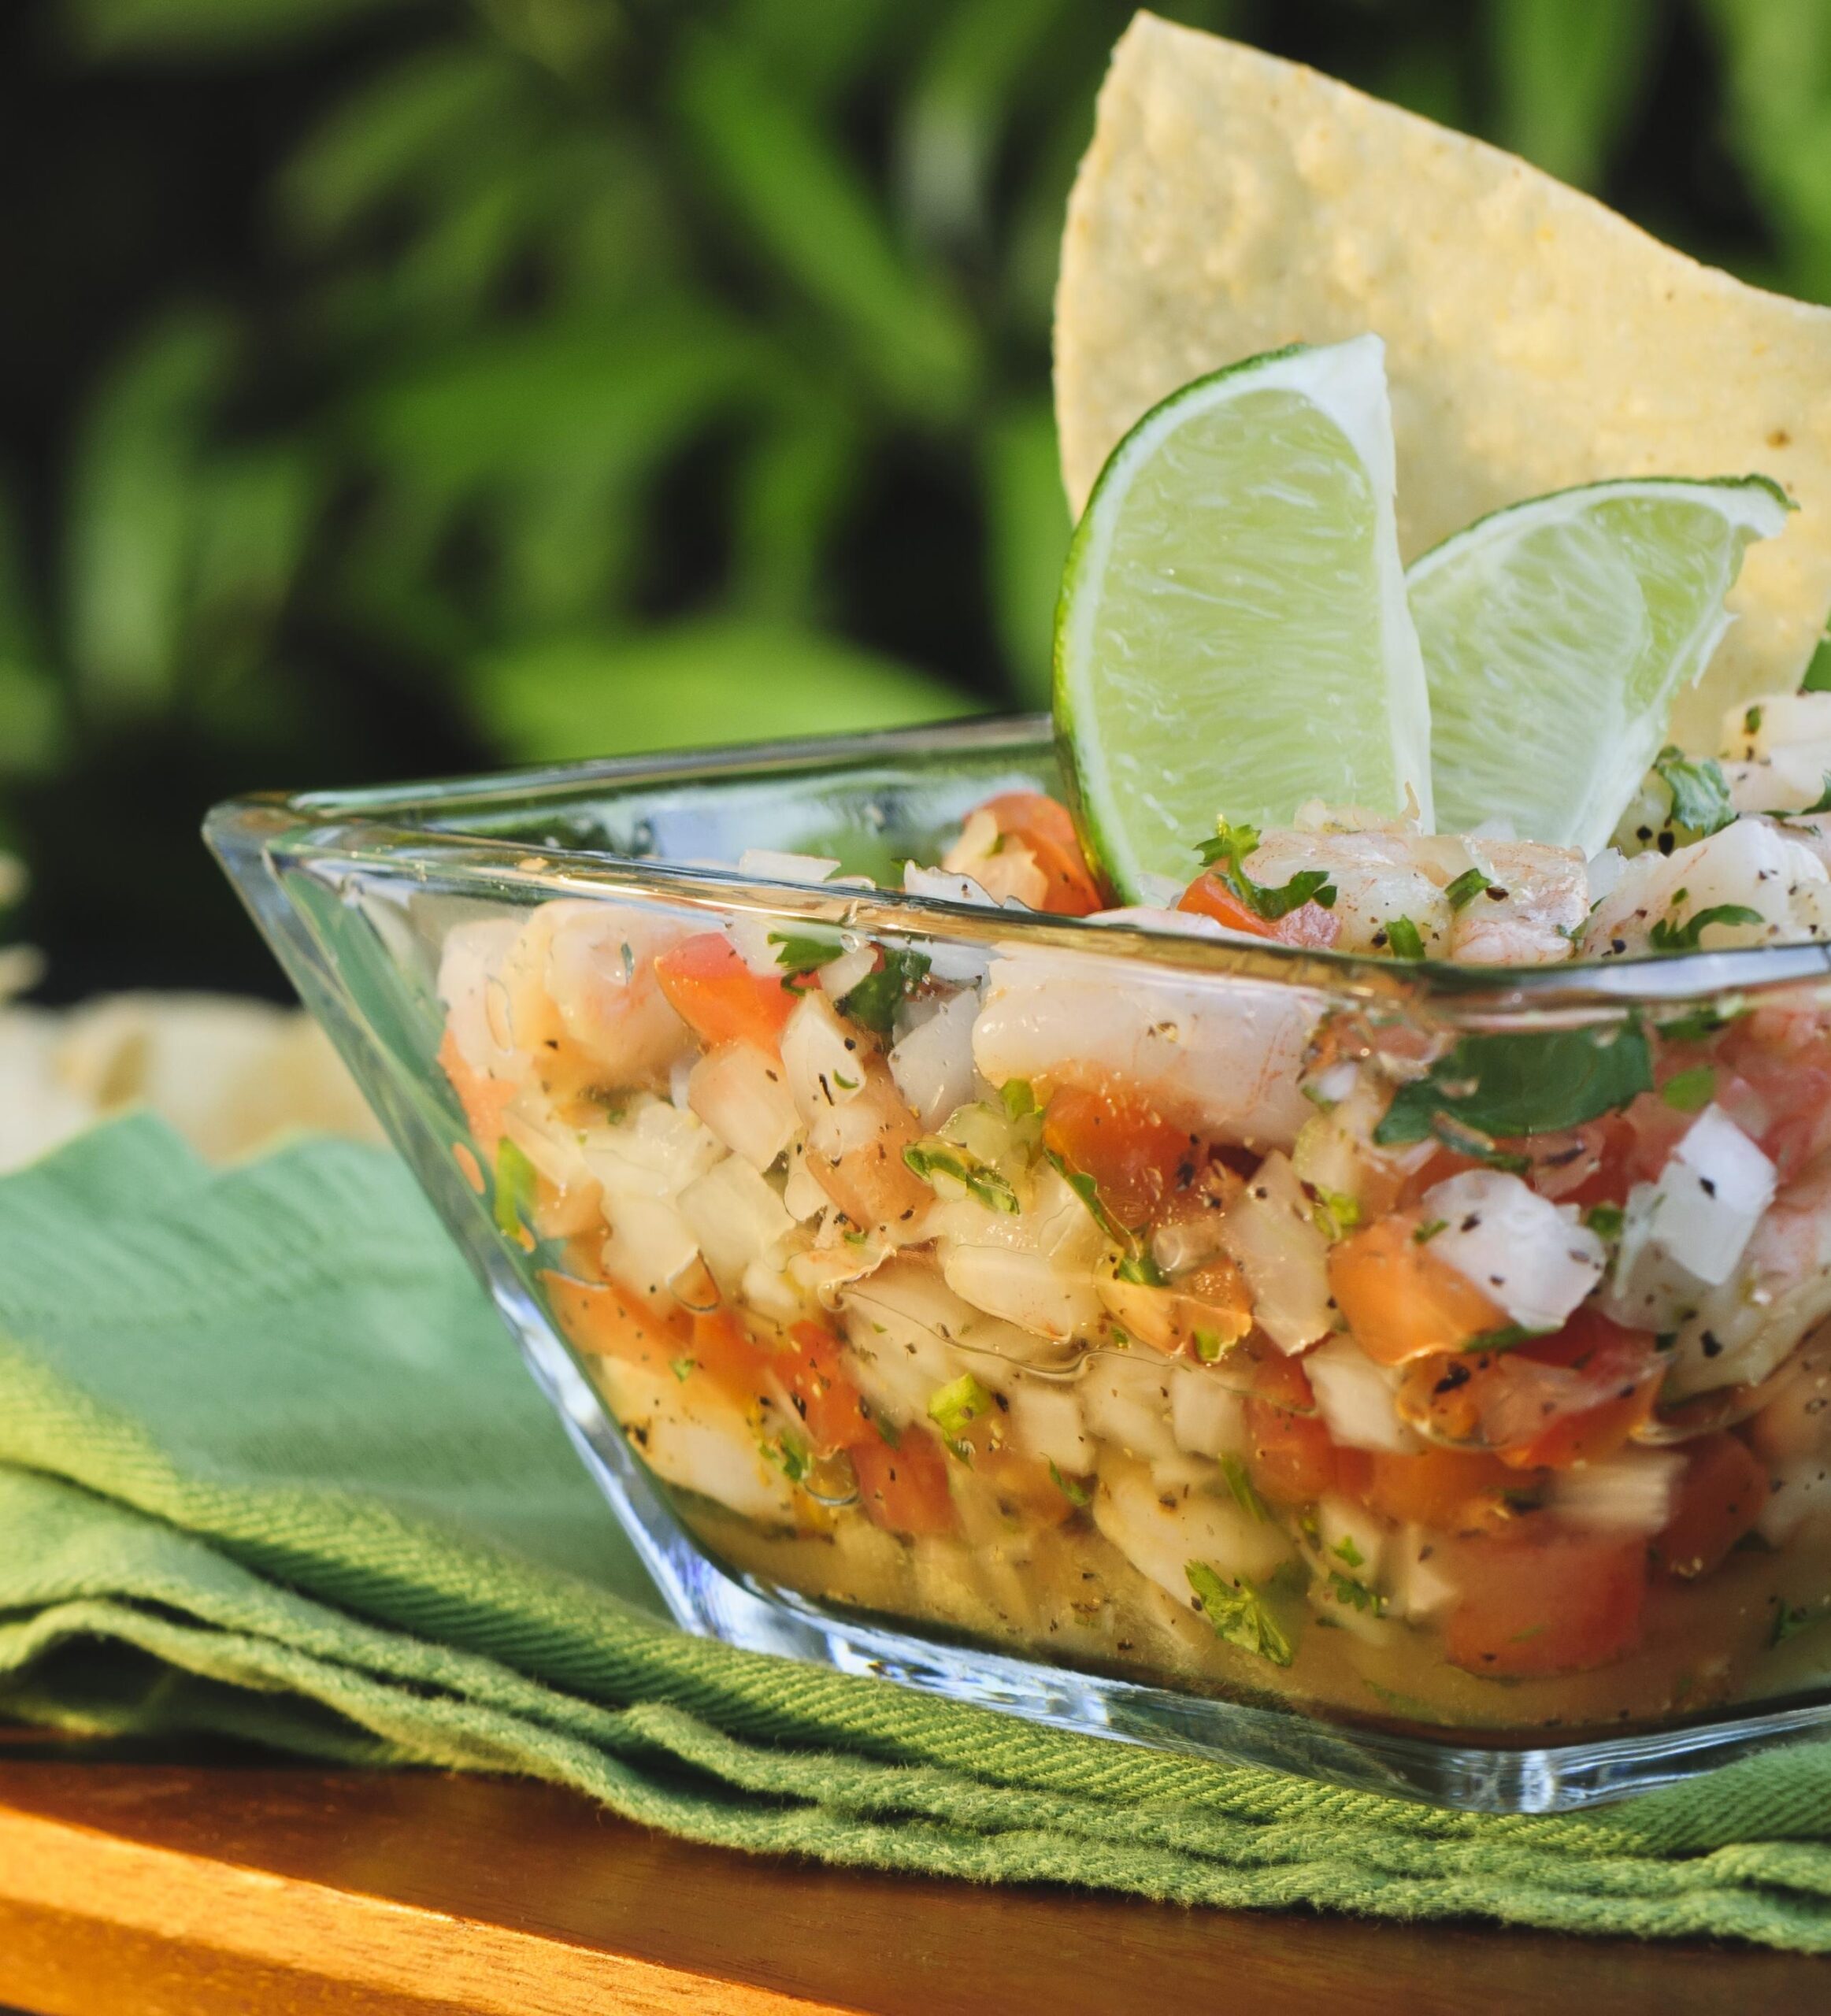  Fresh and Tangy: A Warm Tilapia Ceviche Delight